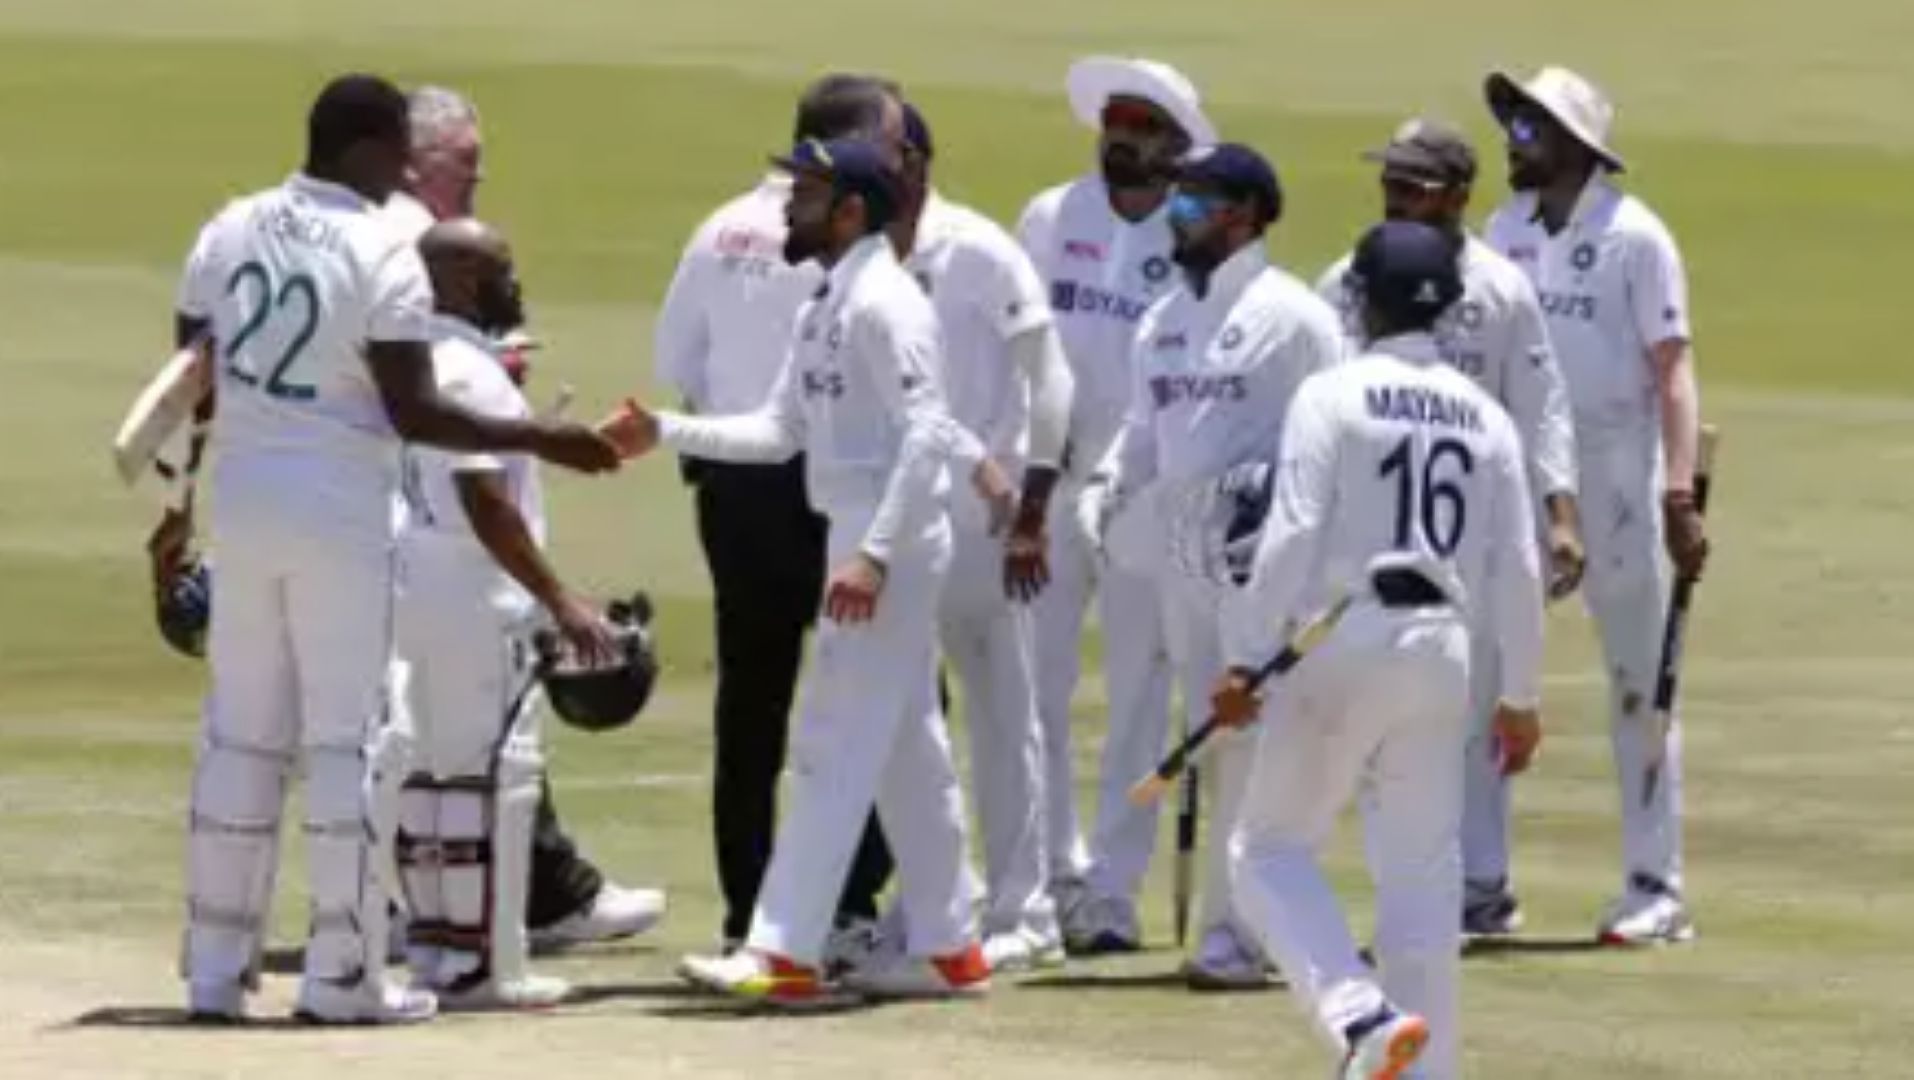 India has never managed to upstage the Proteas in an away Test series.